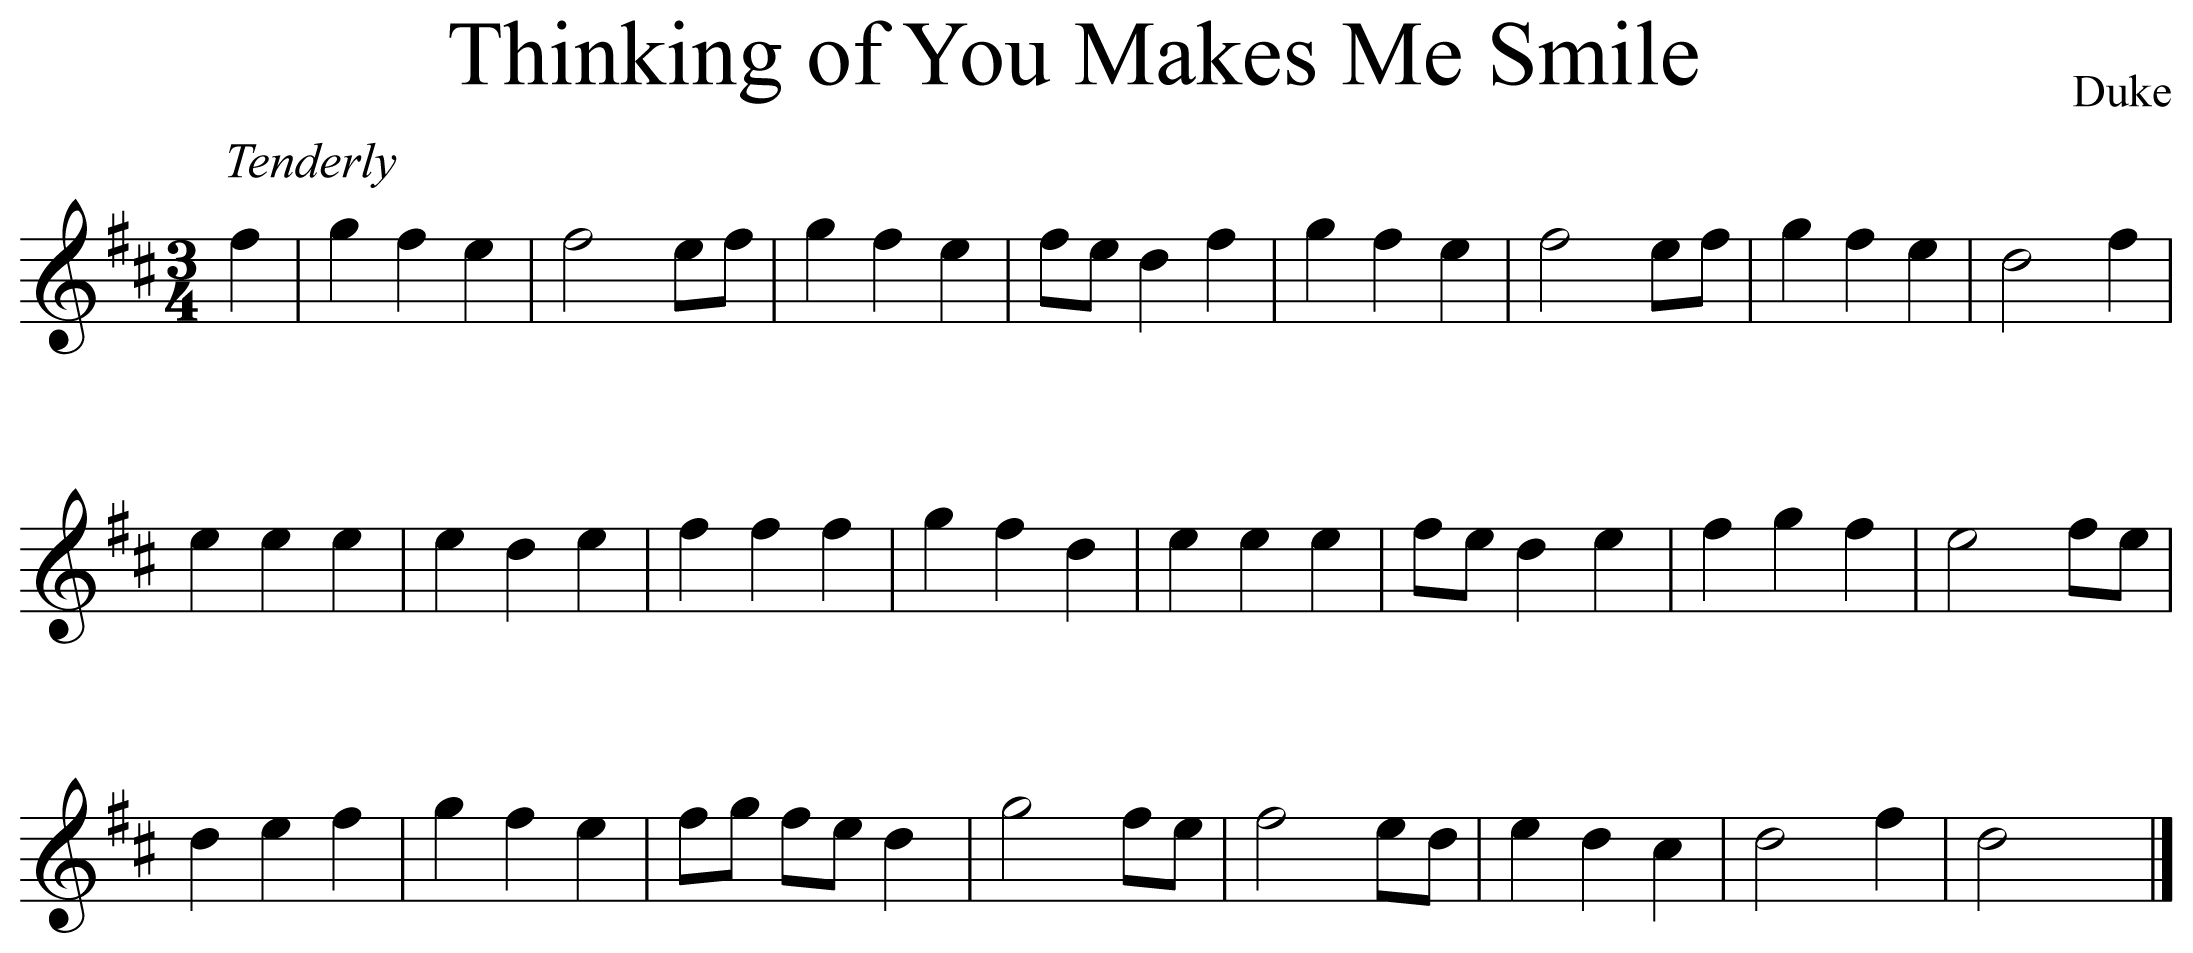 Thinking of You Makes Me Smile Notation Saxohpone